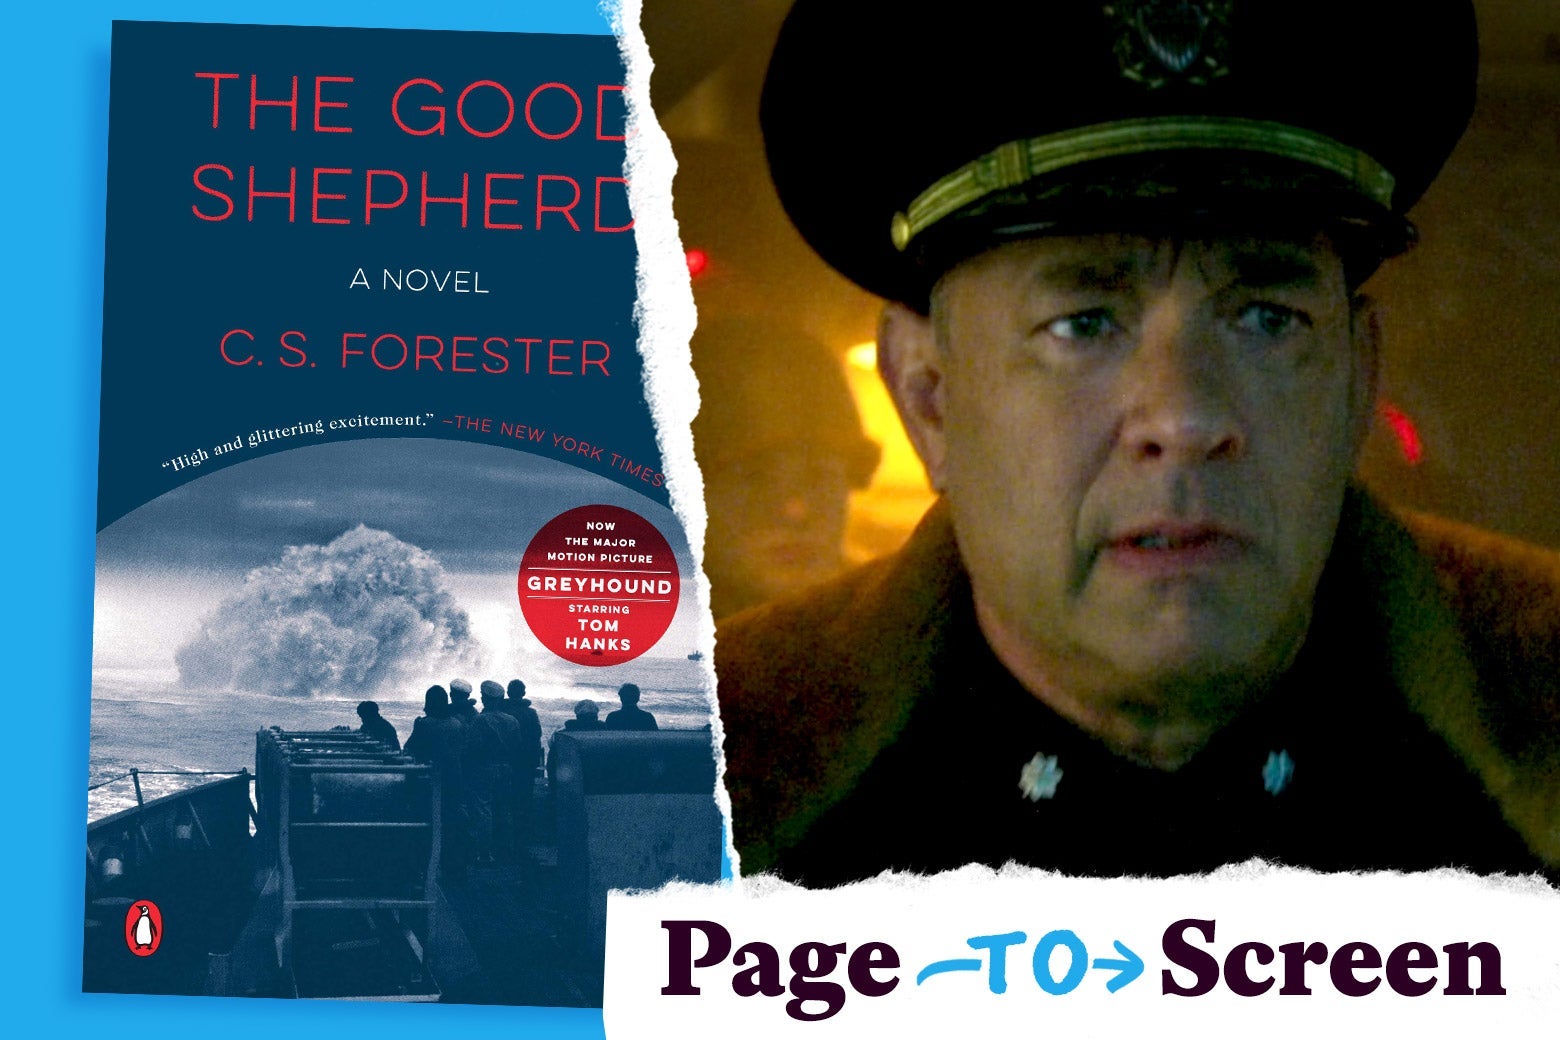 The Good Shepherd's book cover, and Tom Hanks in the movie Greyhound.